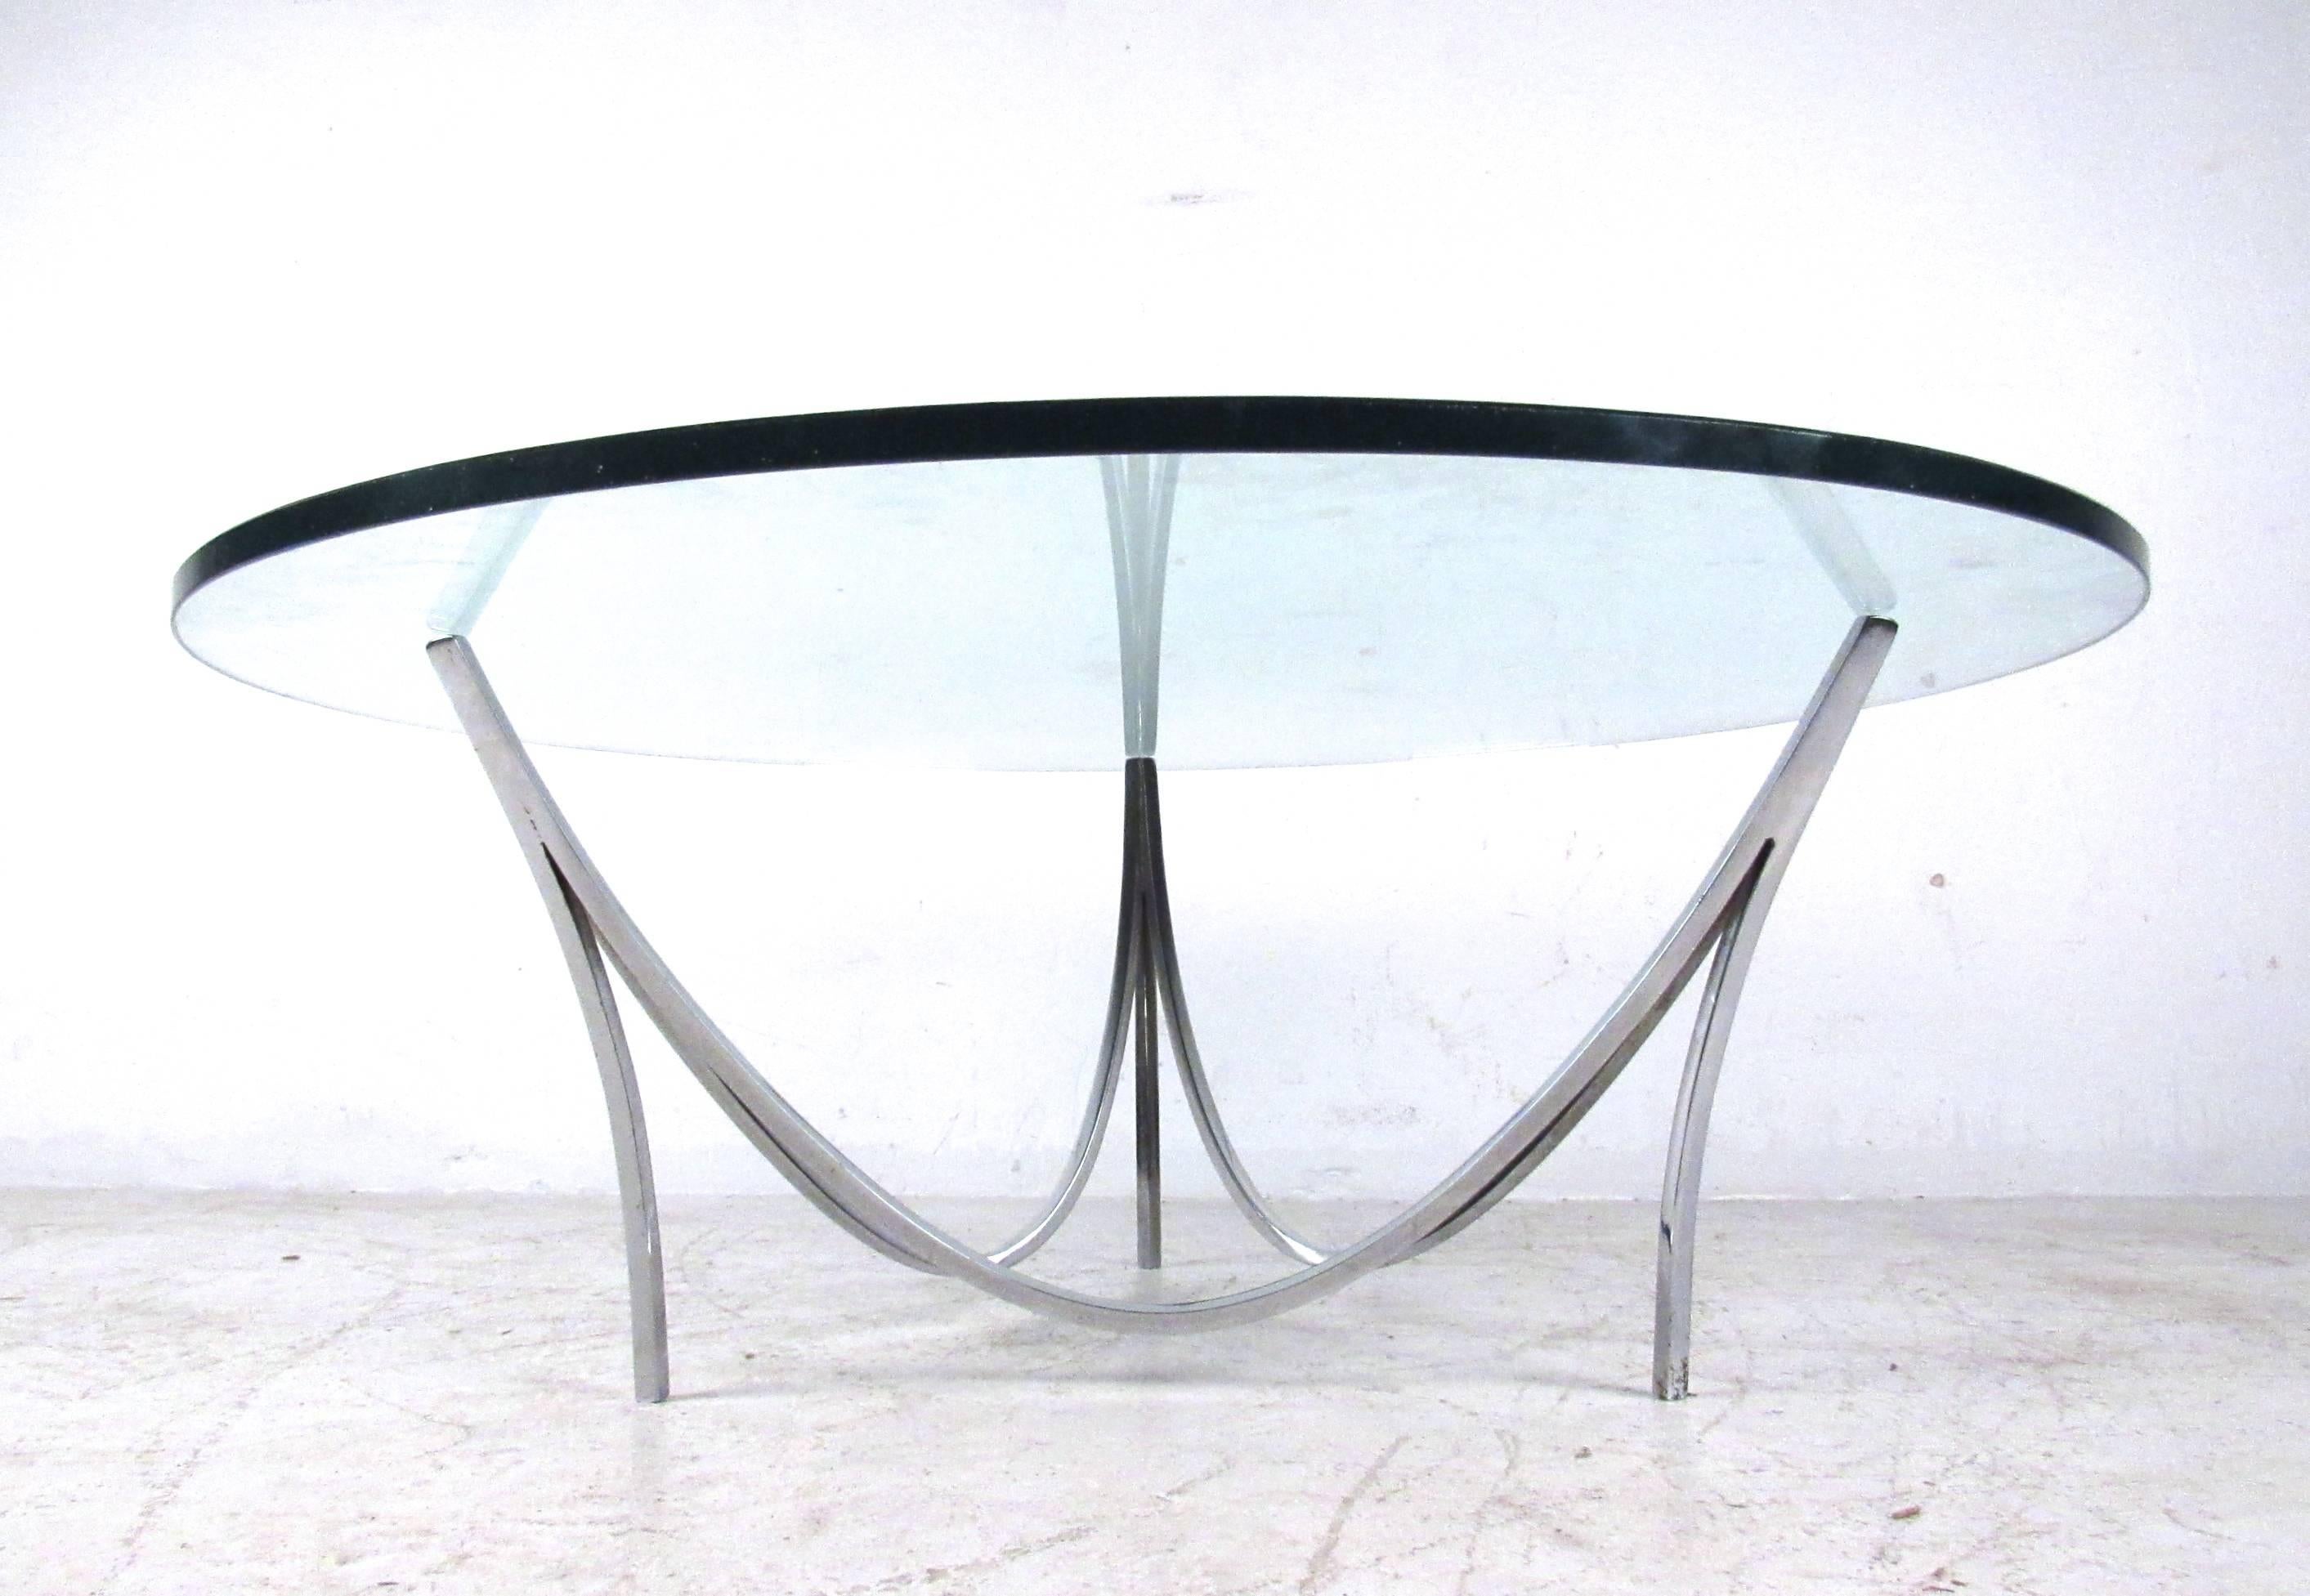 This vintage chrome coffee table is beautifully designed, making a stylish midcentury addition to any room. The unique shape of this sturdy metal base is complimented by the circular 1/2 inch glass top. Please confirm item location (NY or NJ).